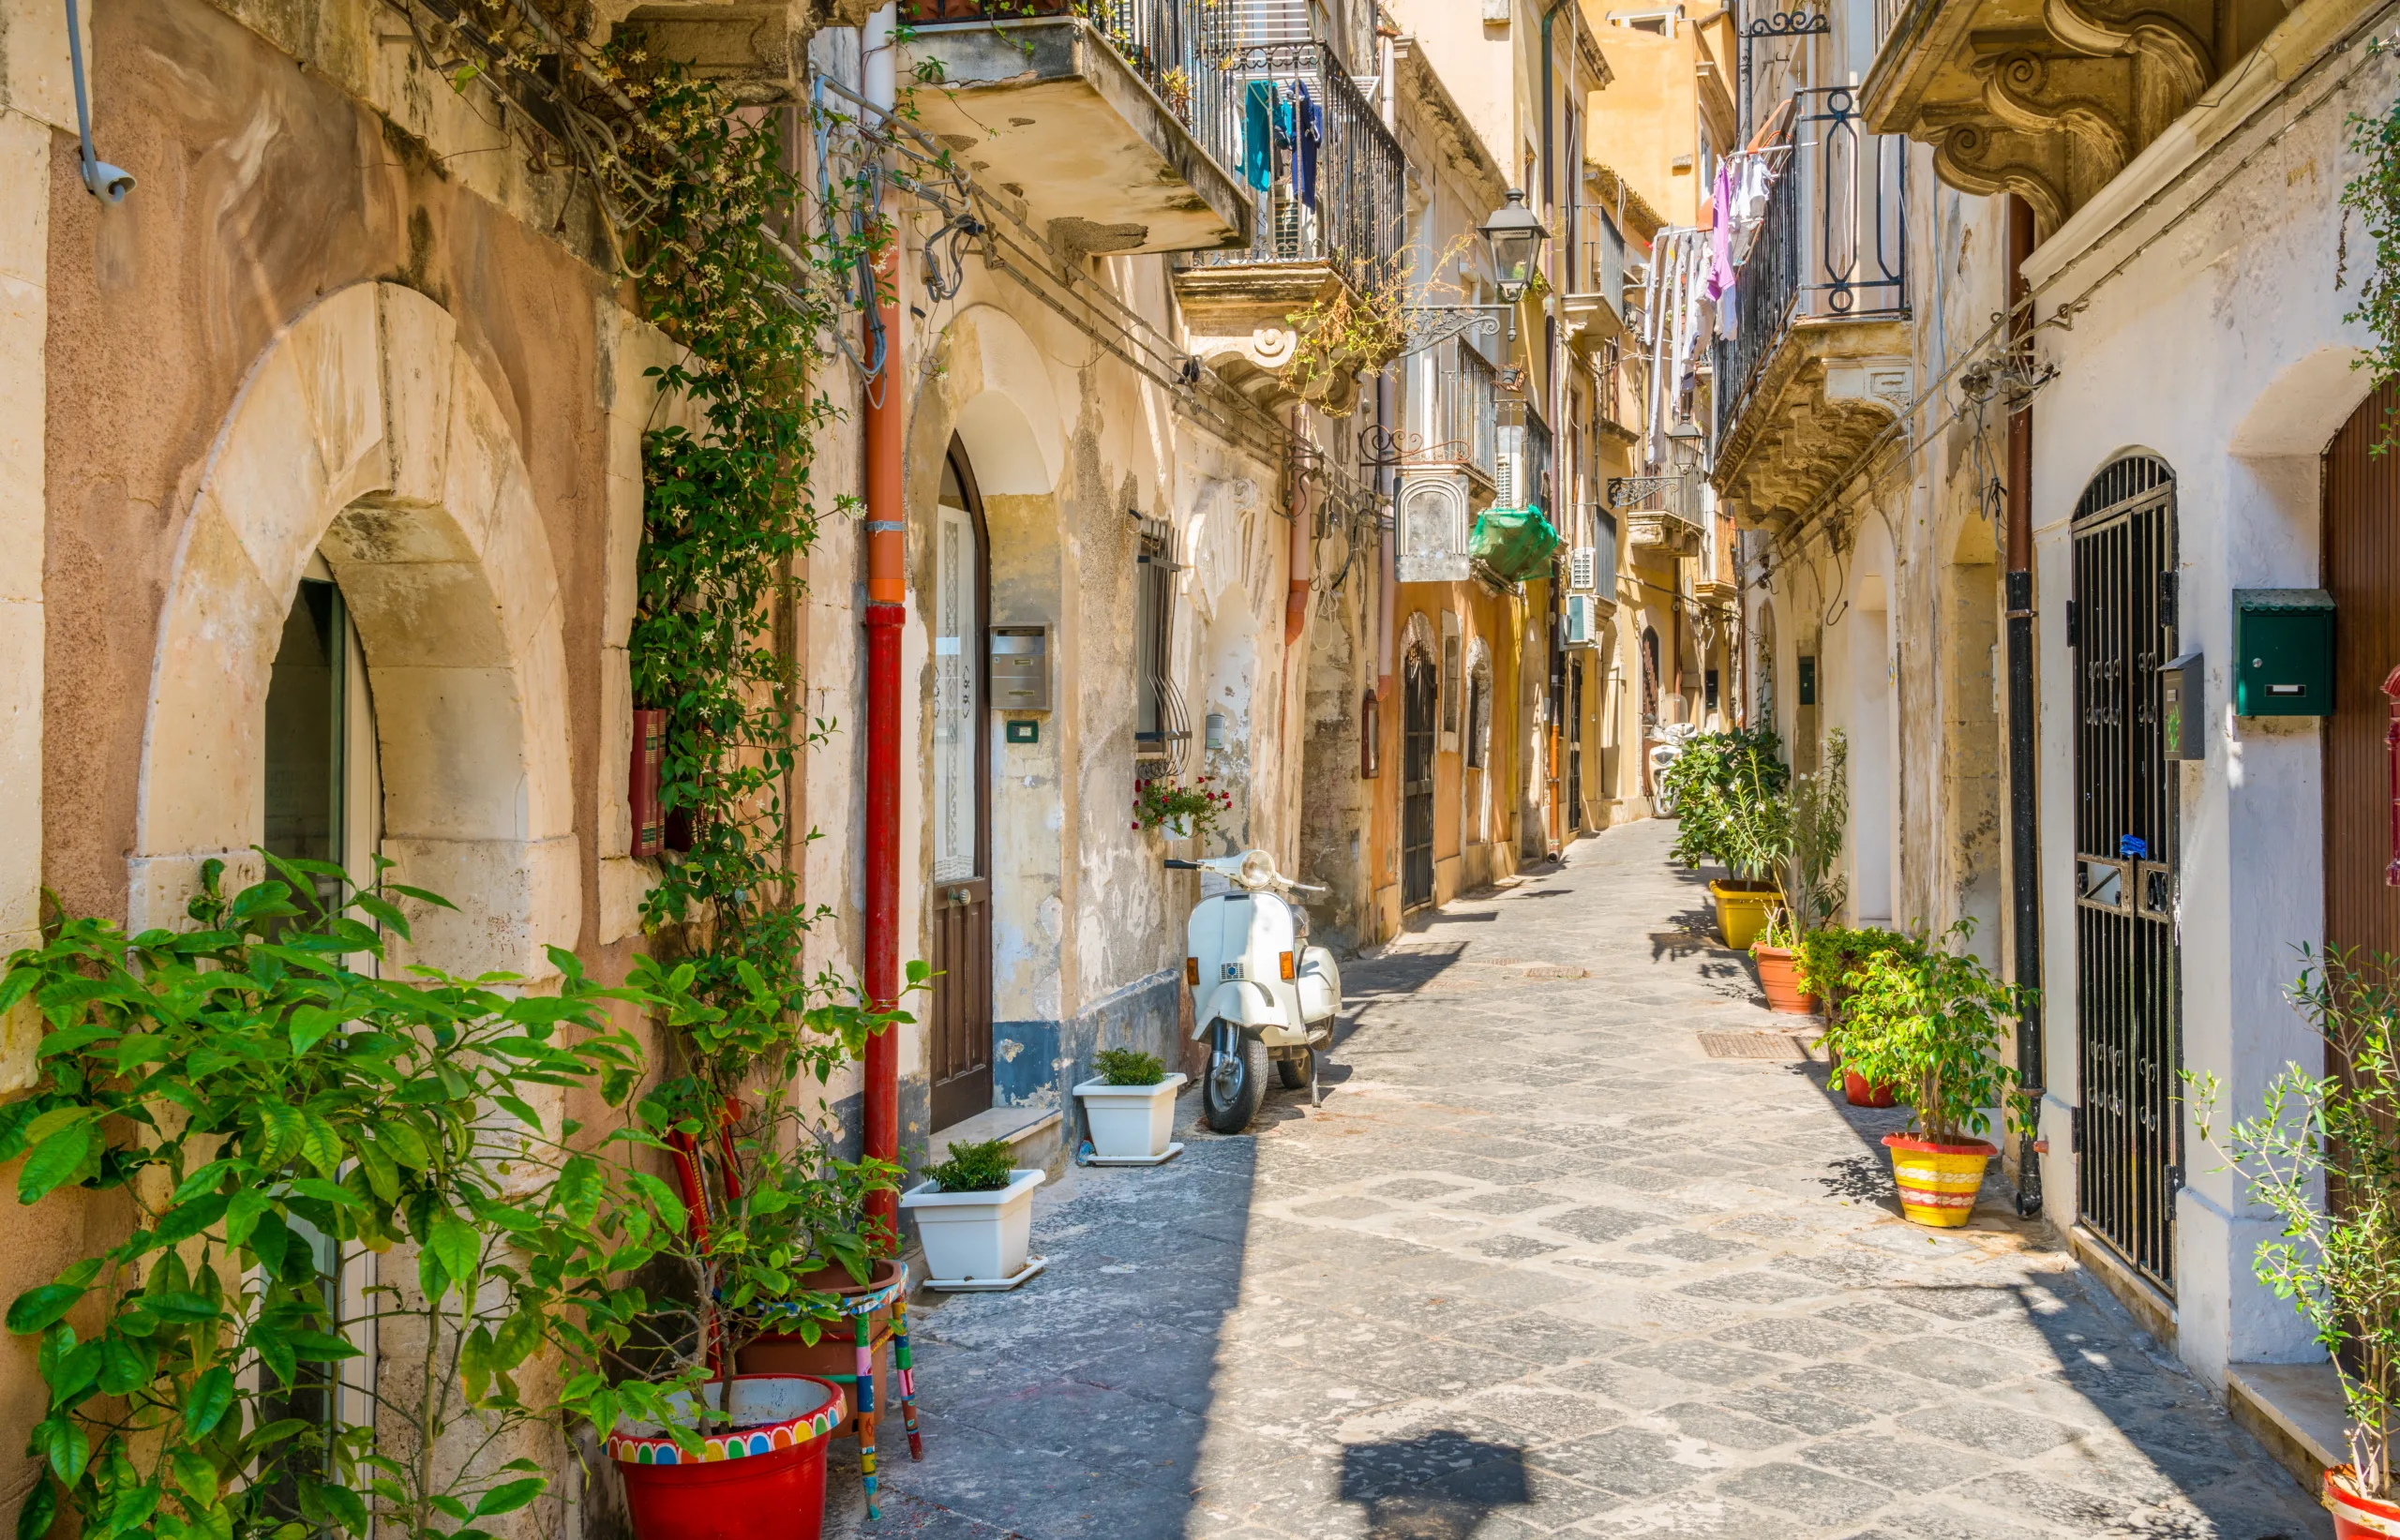 Picturesque Street In Ortigia, Siracusa Old Town, Sicily, Southern, Italy.